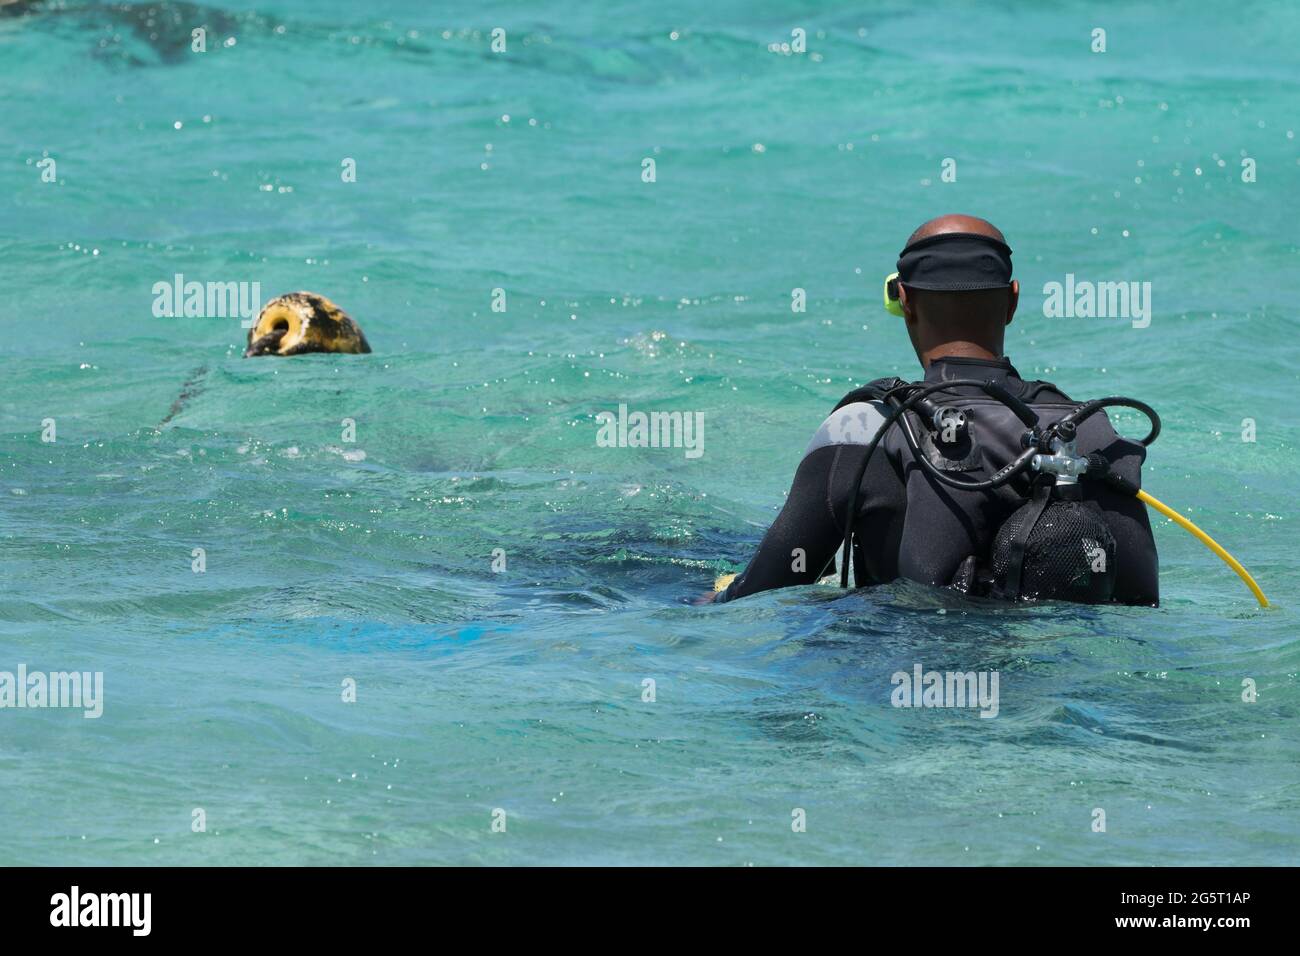 scuba diver entering turquoise blue sea water concept water sport or recreational activity on a Summer holiday or vacation Stock Photo